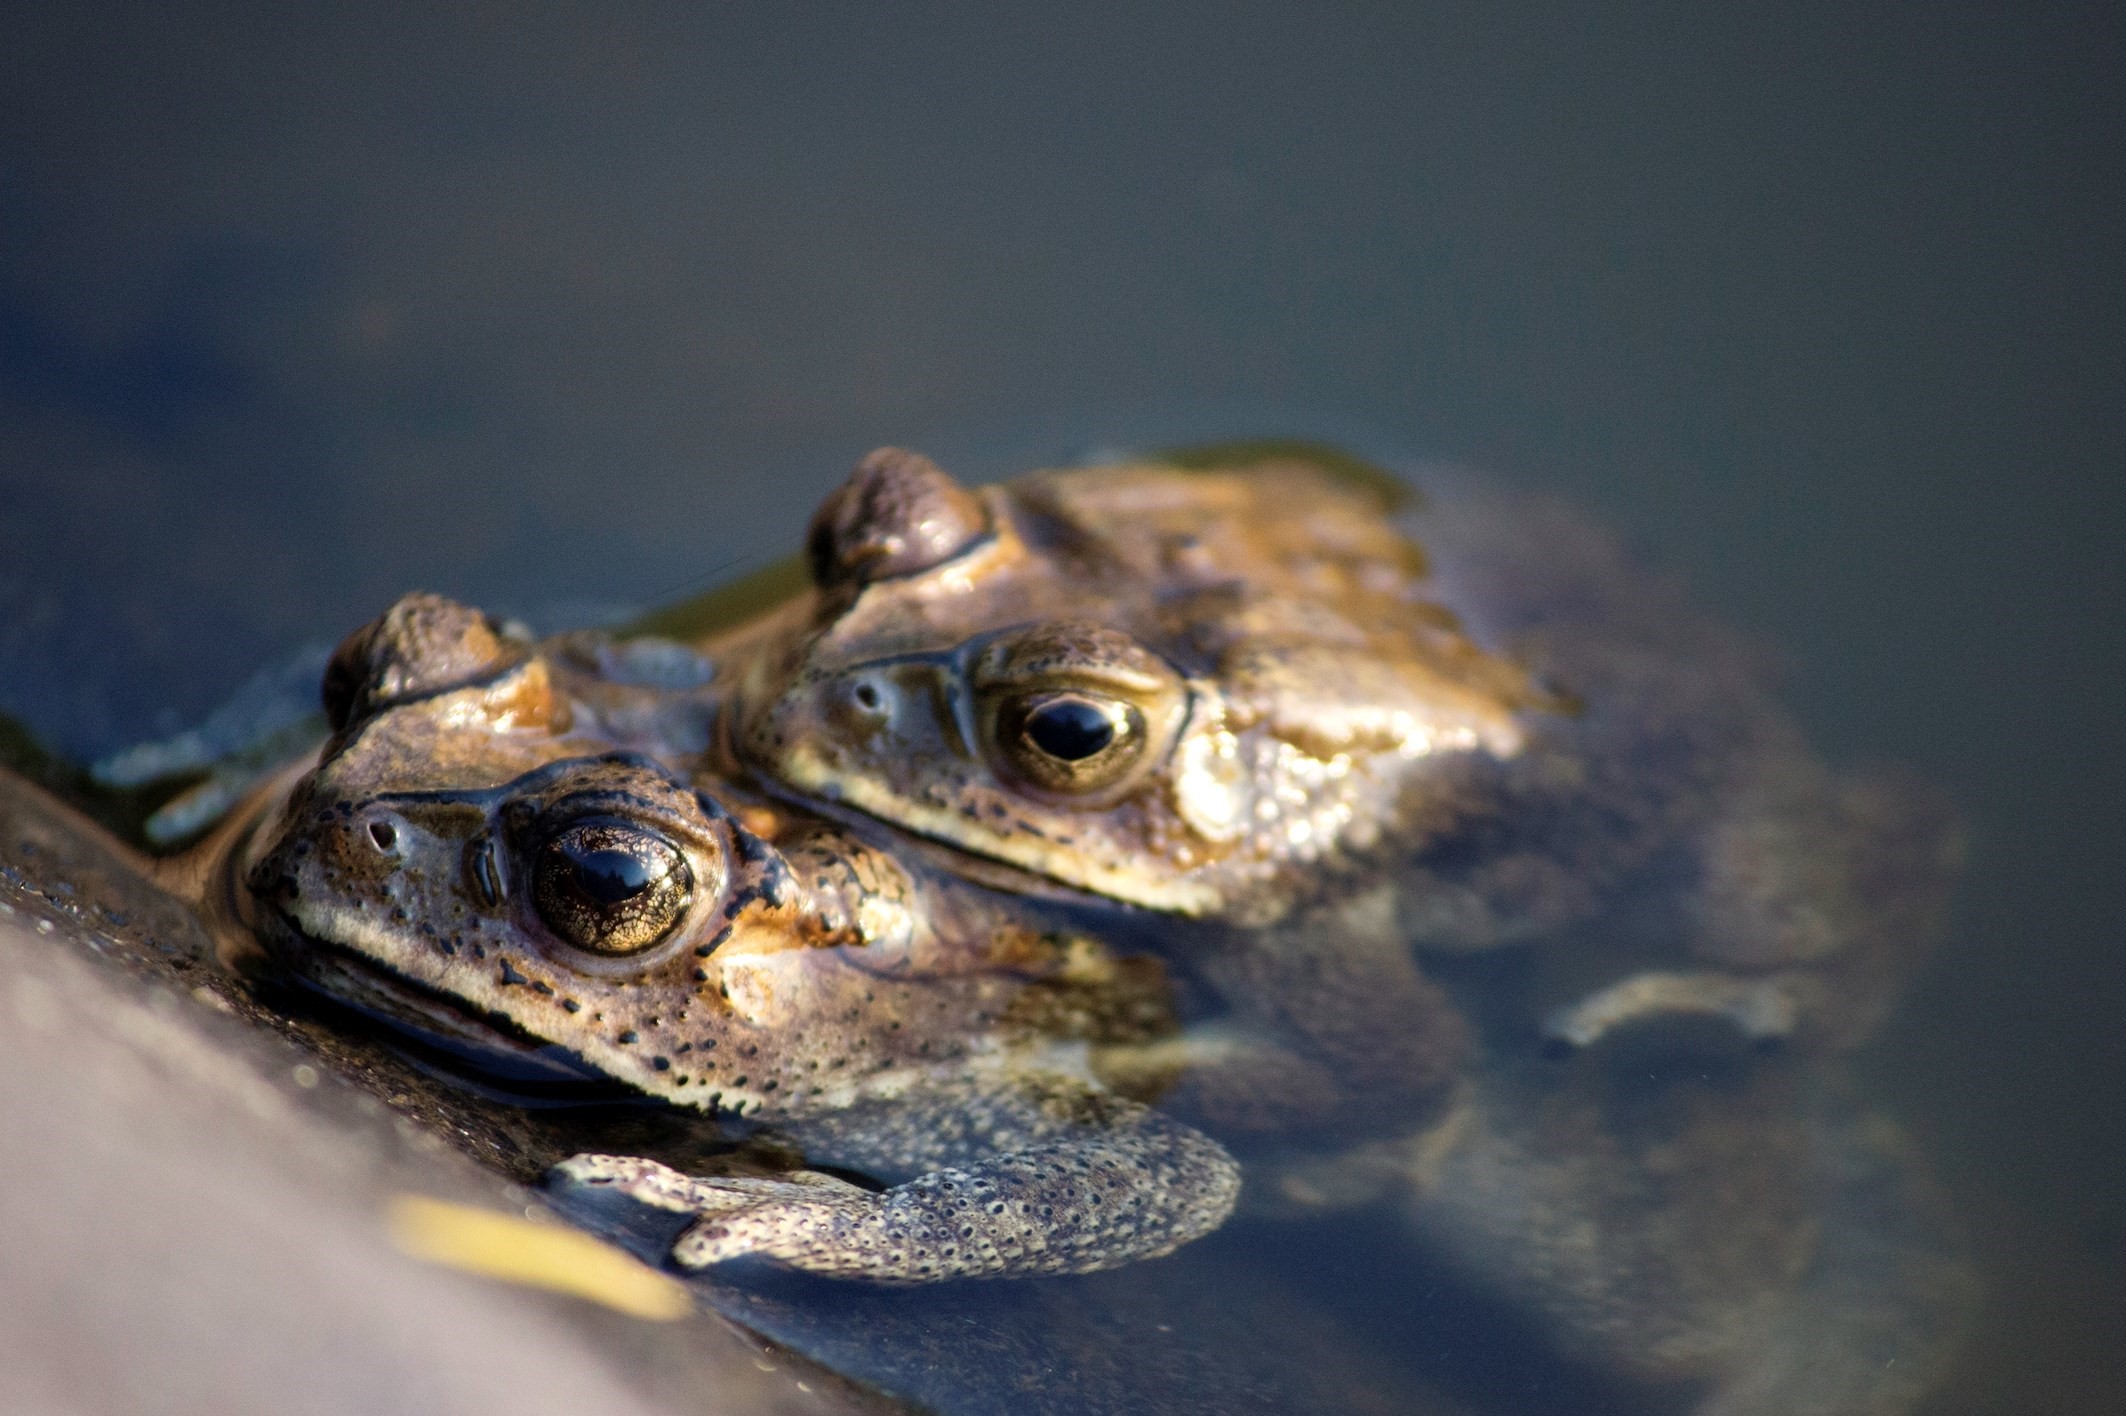 Female frogs pretend to be dead so males stop sexually harassing